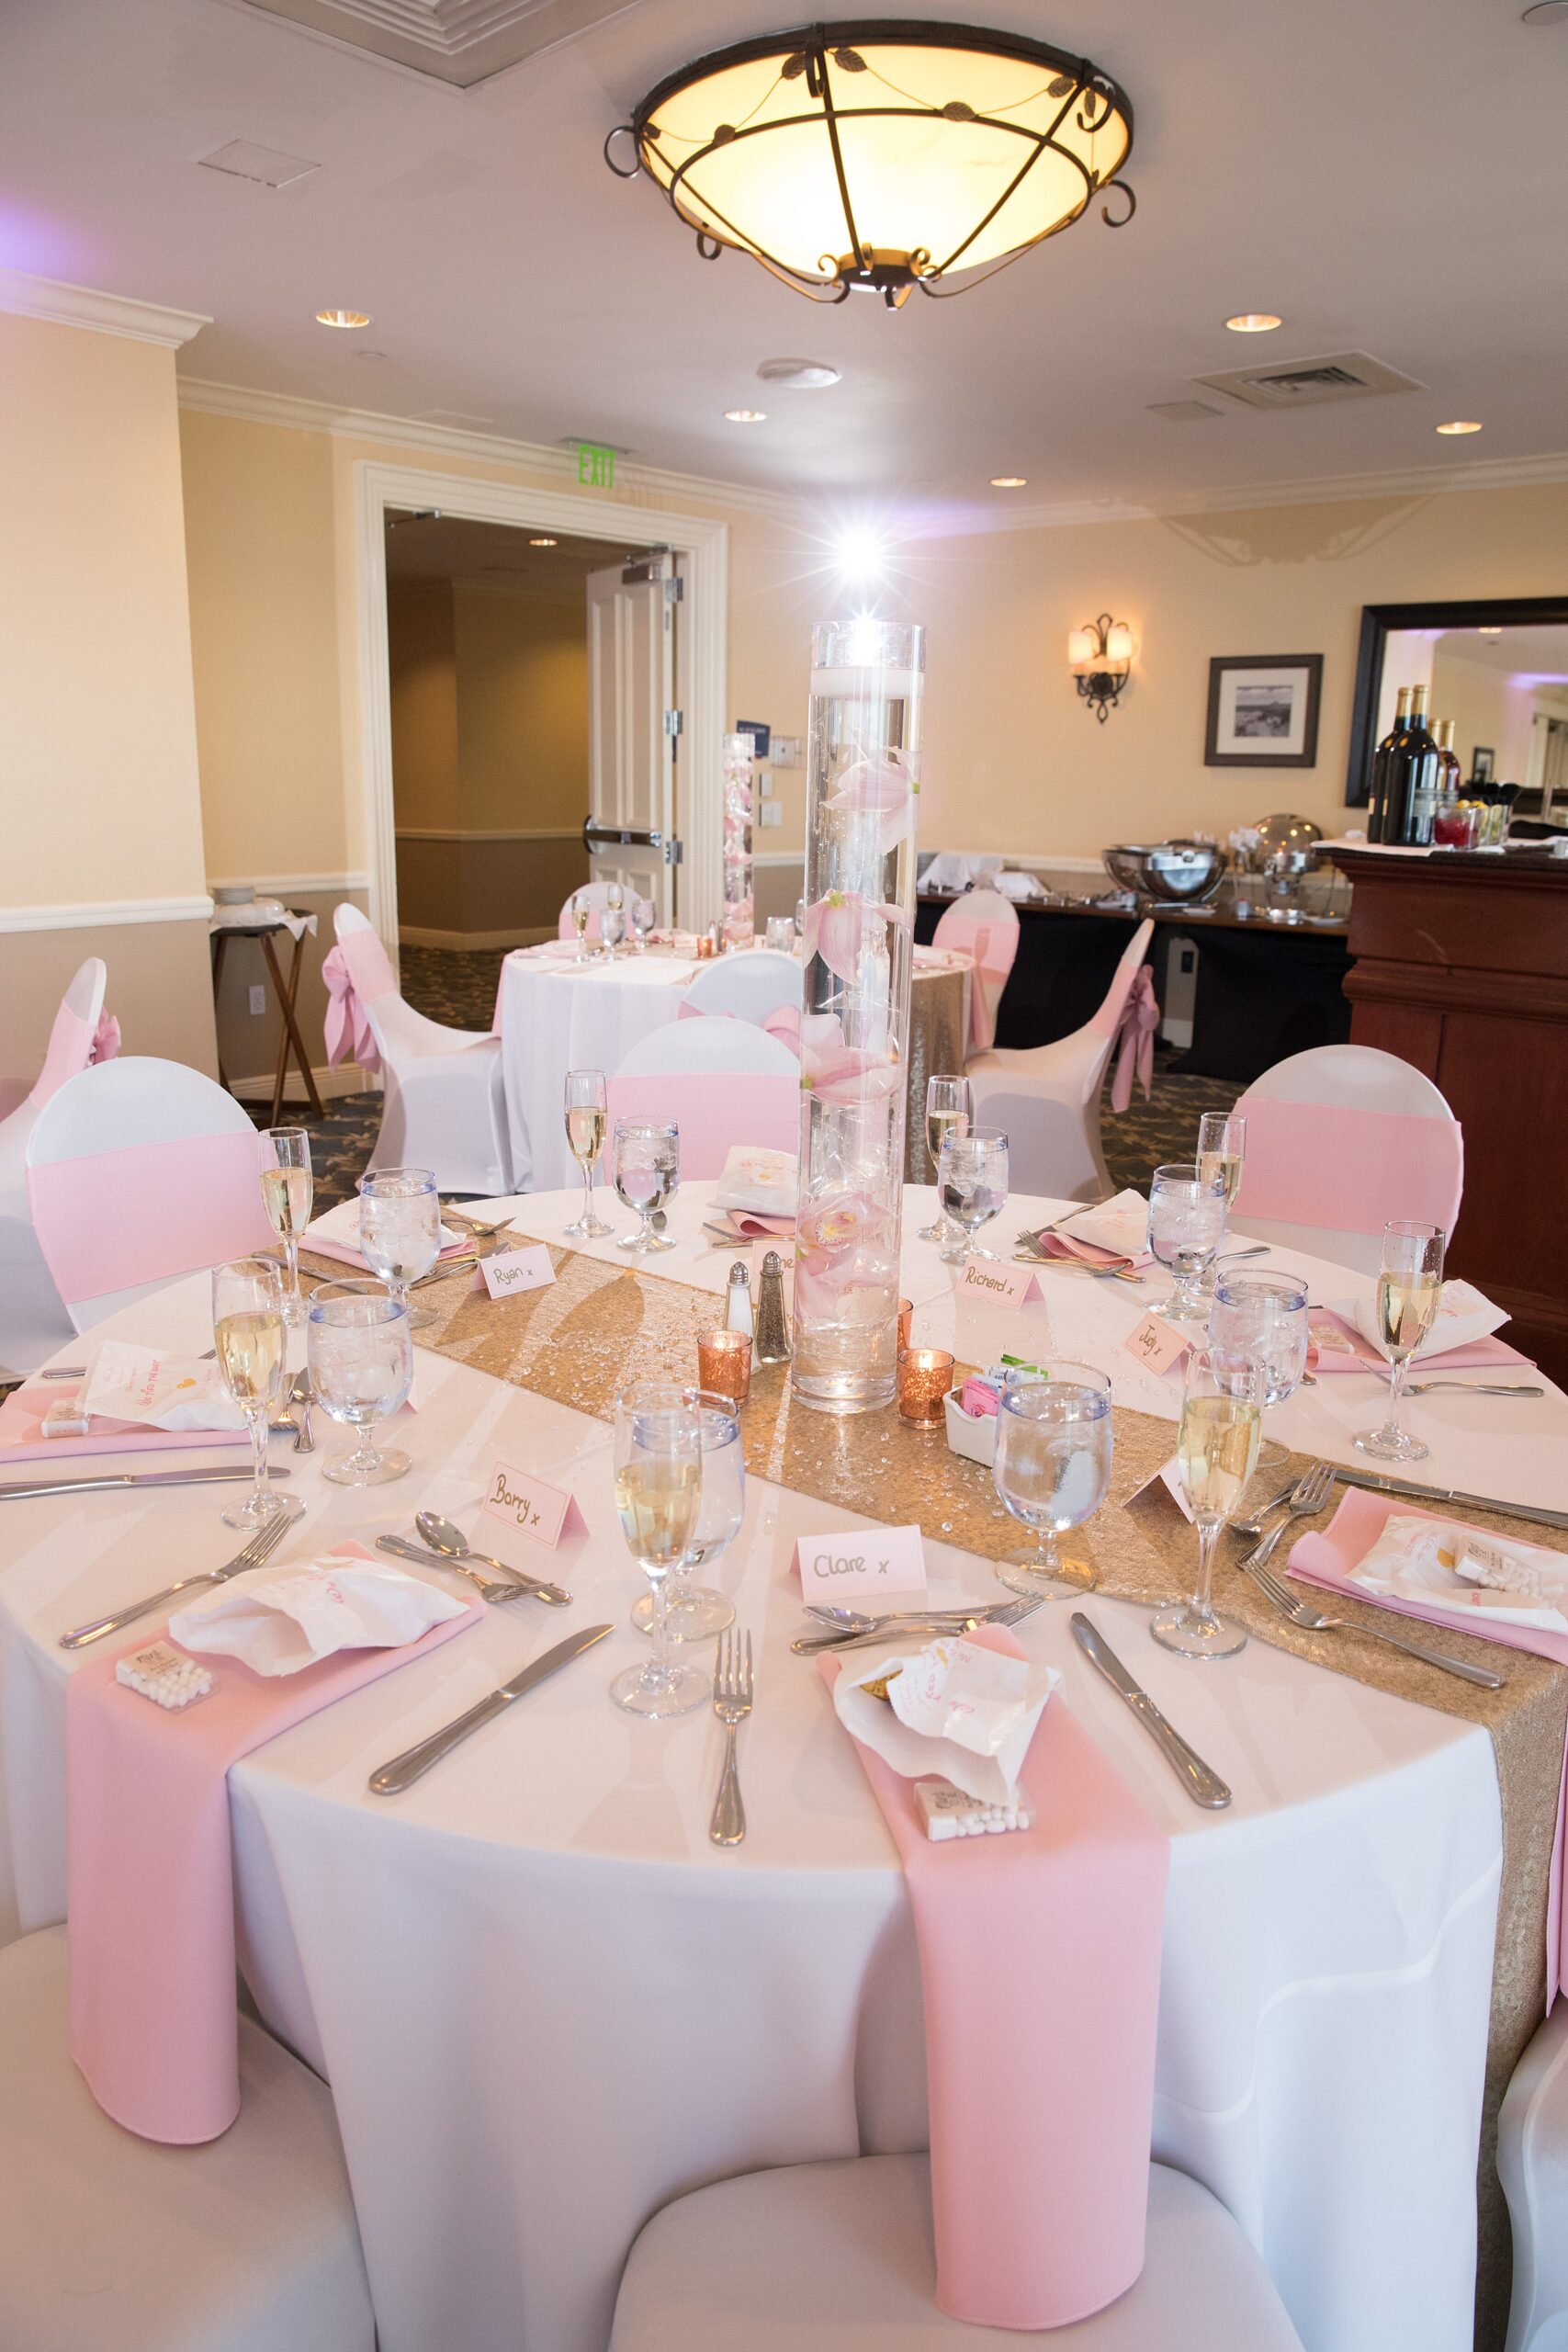 Details of a wedding reception table set up with pink napkins